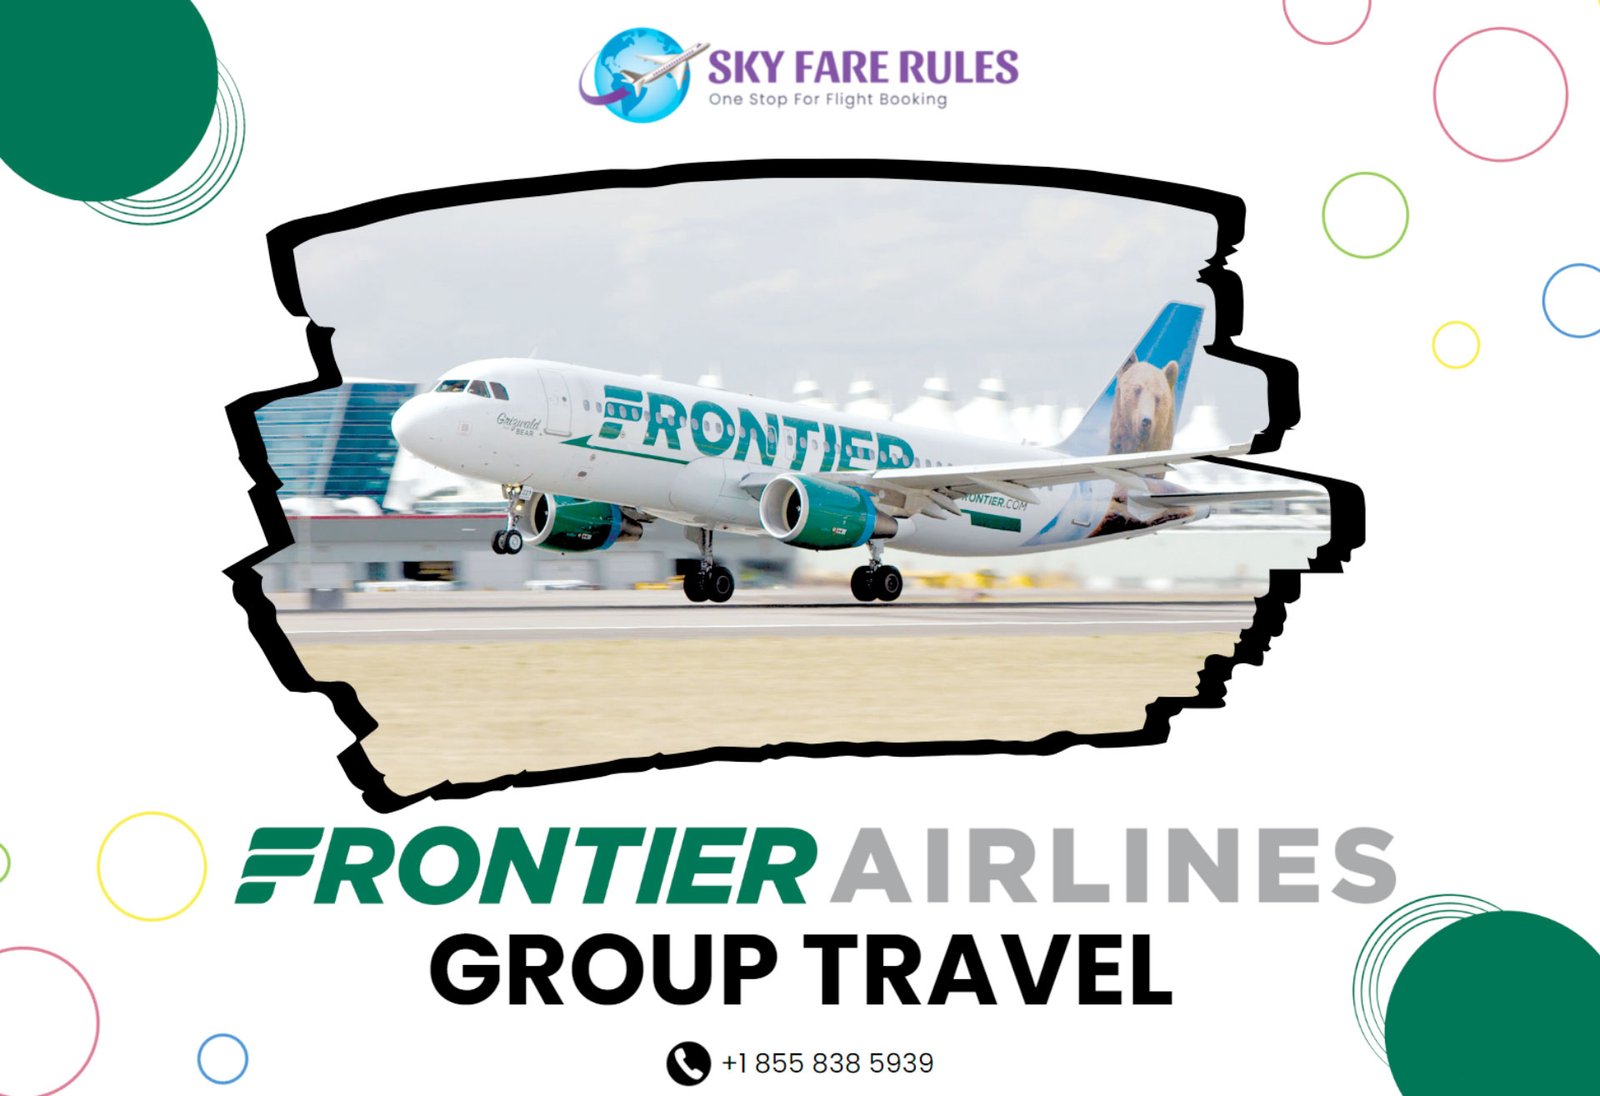 Frontier Airlines Group Travel Booking - Sky Fare Rules